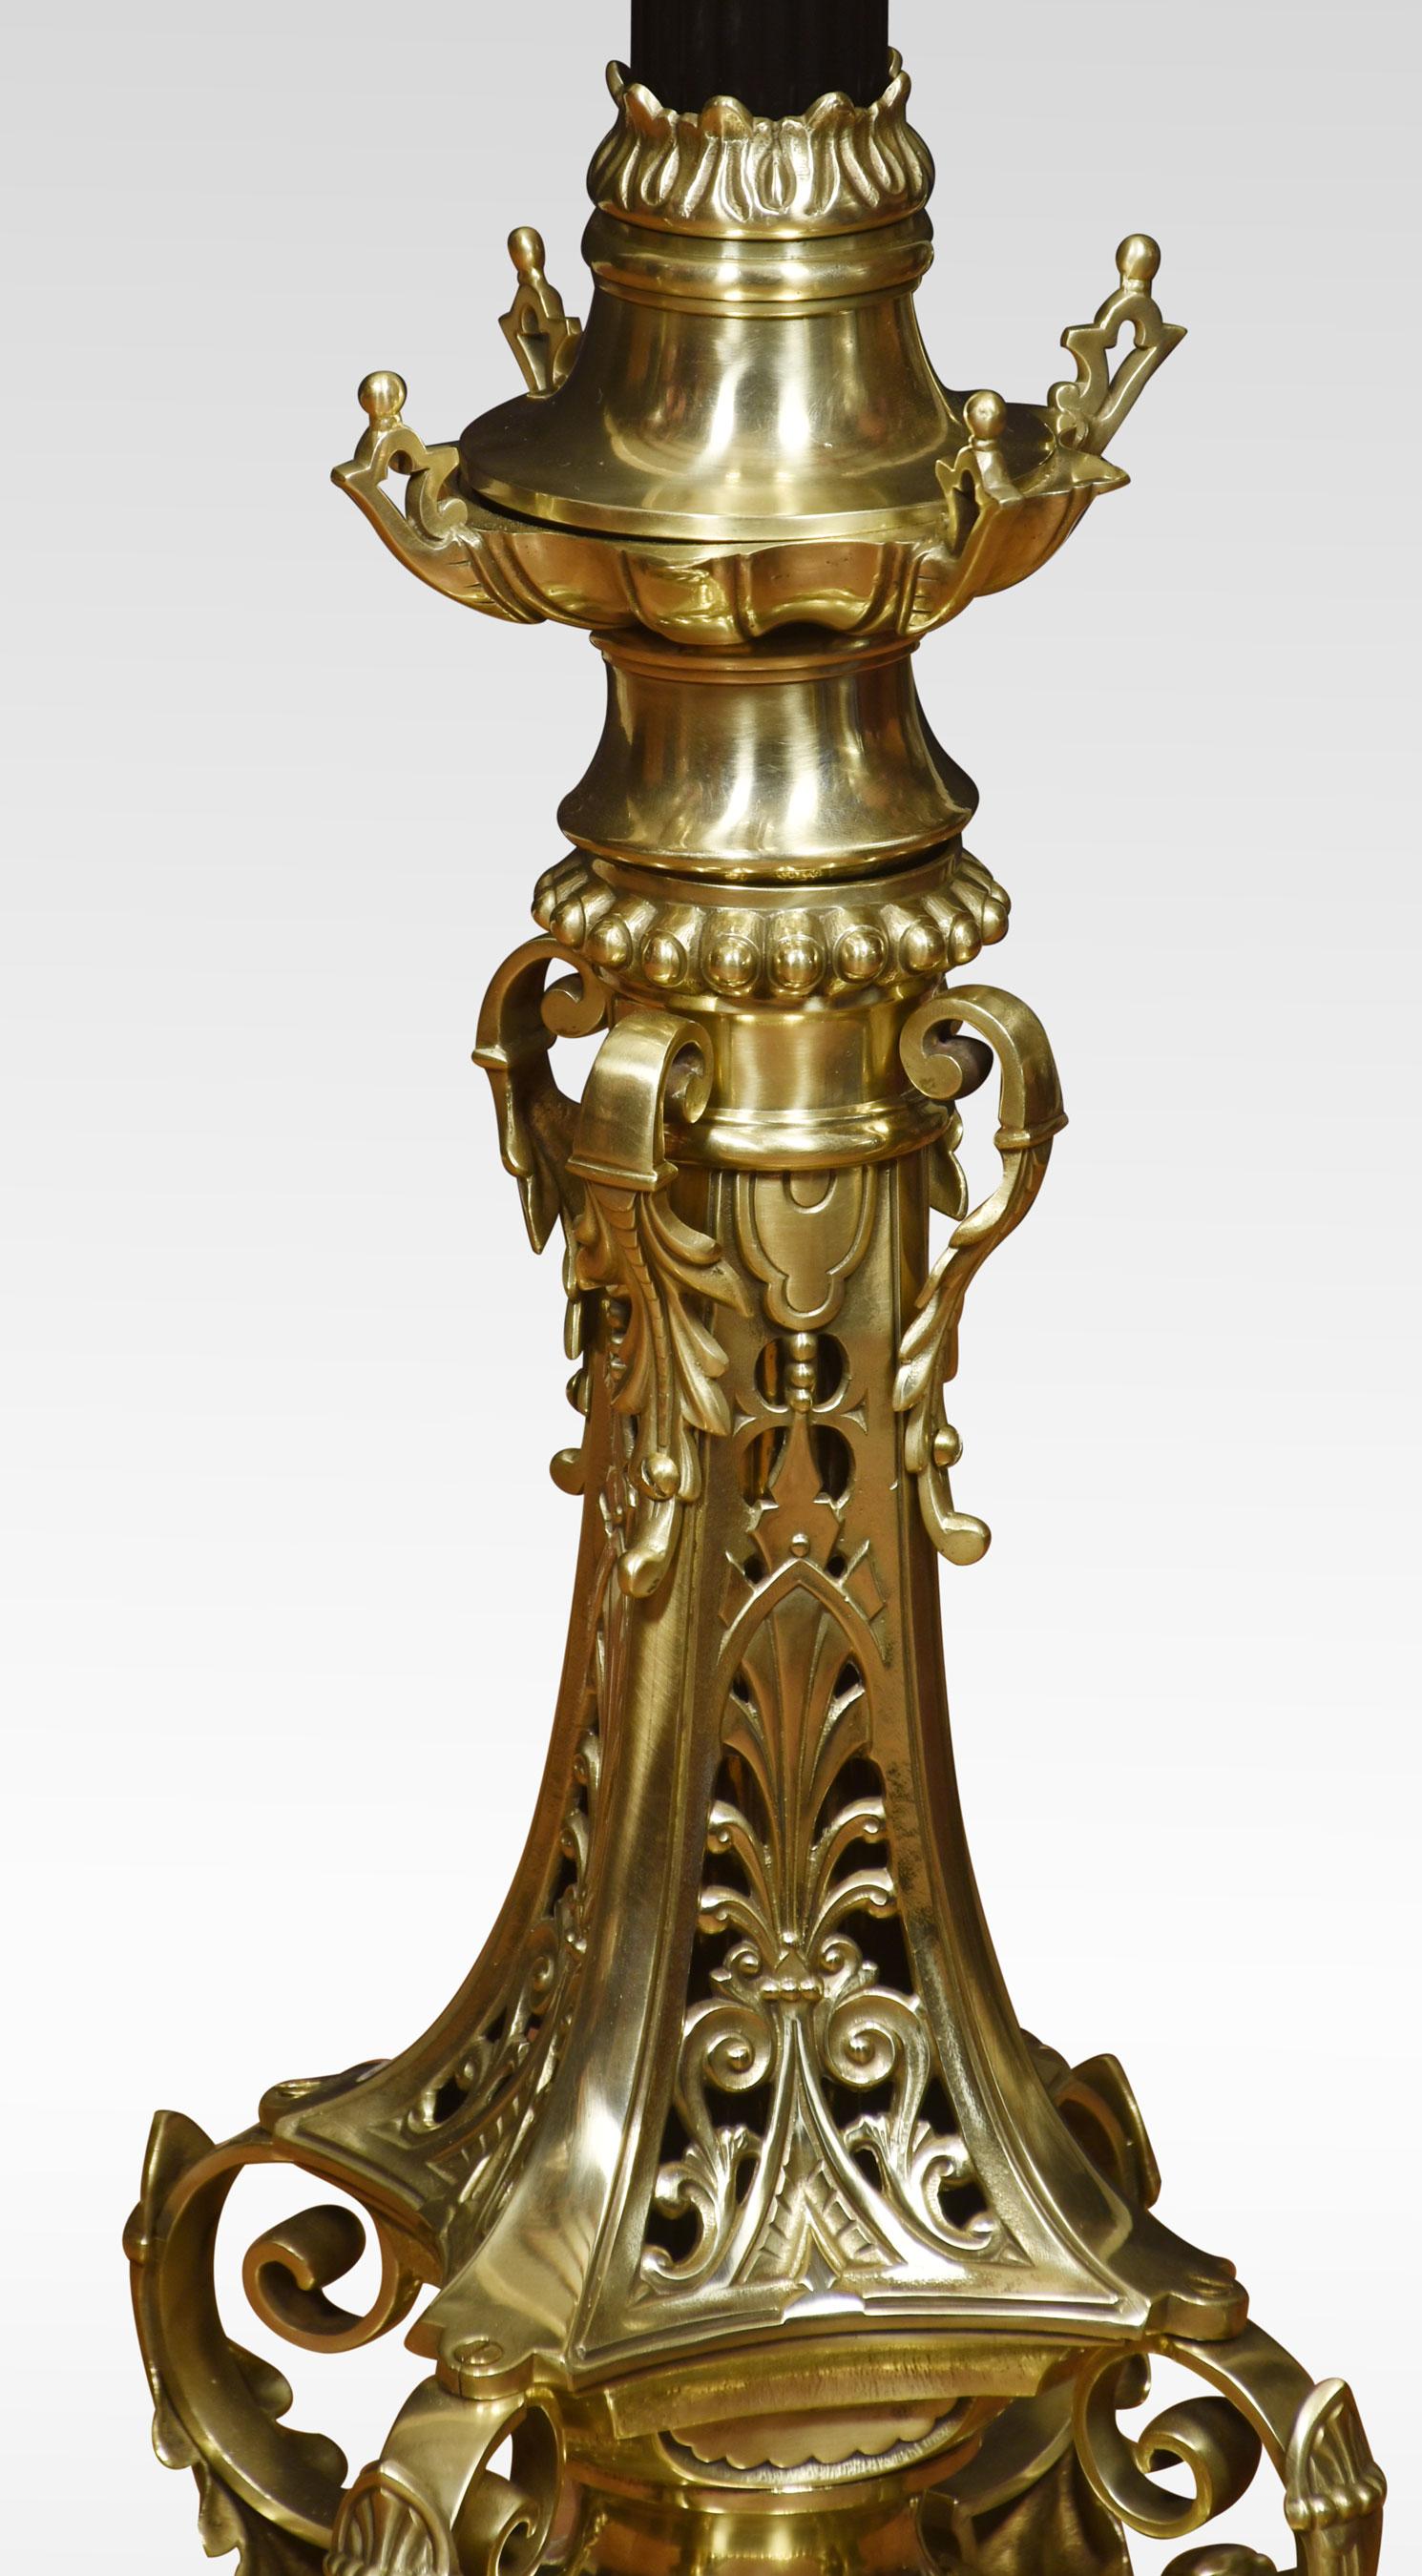 Brass standard lamp, with a circular adjustable reeded ebonized column. Raised up on pierced base with the goddess Nike mounts. The lamp has been rewired and tested.
Dimensions
Height 51.5 inches ajustable to 79 inches
Width 14 inches
Depth 14